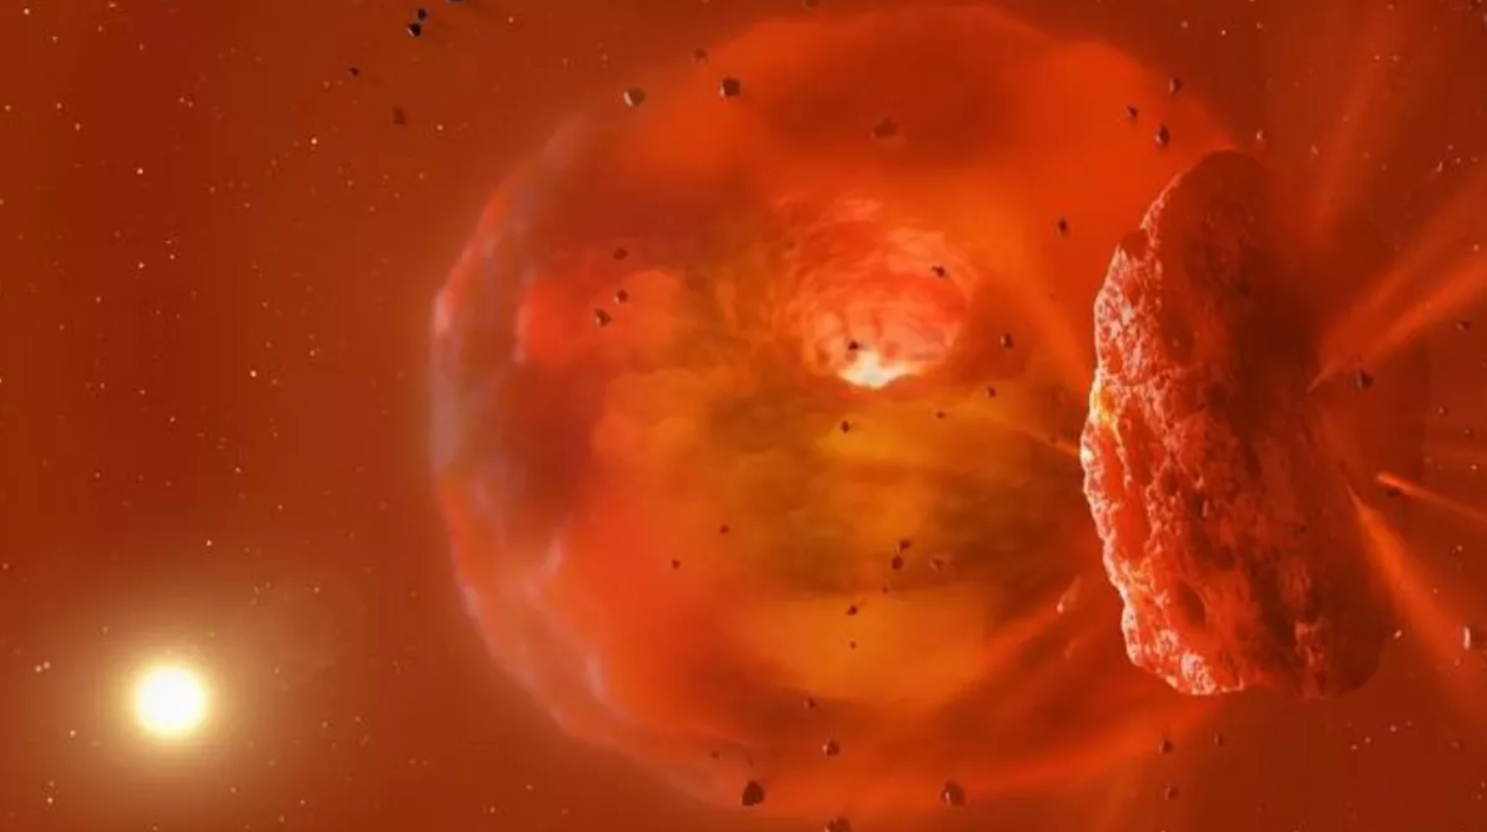 Astronomers have successfully recorded the initial planet collision, resulting in a dust cloud that is now causing the parent star’s light to dim.